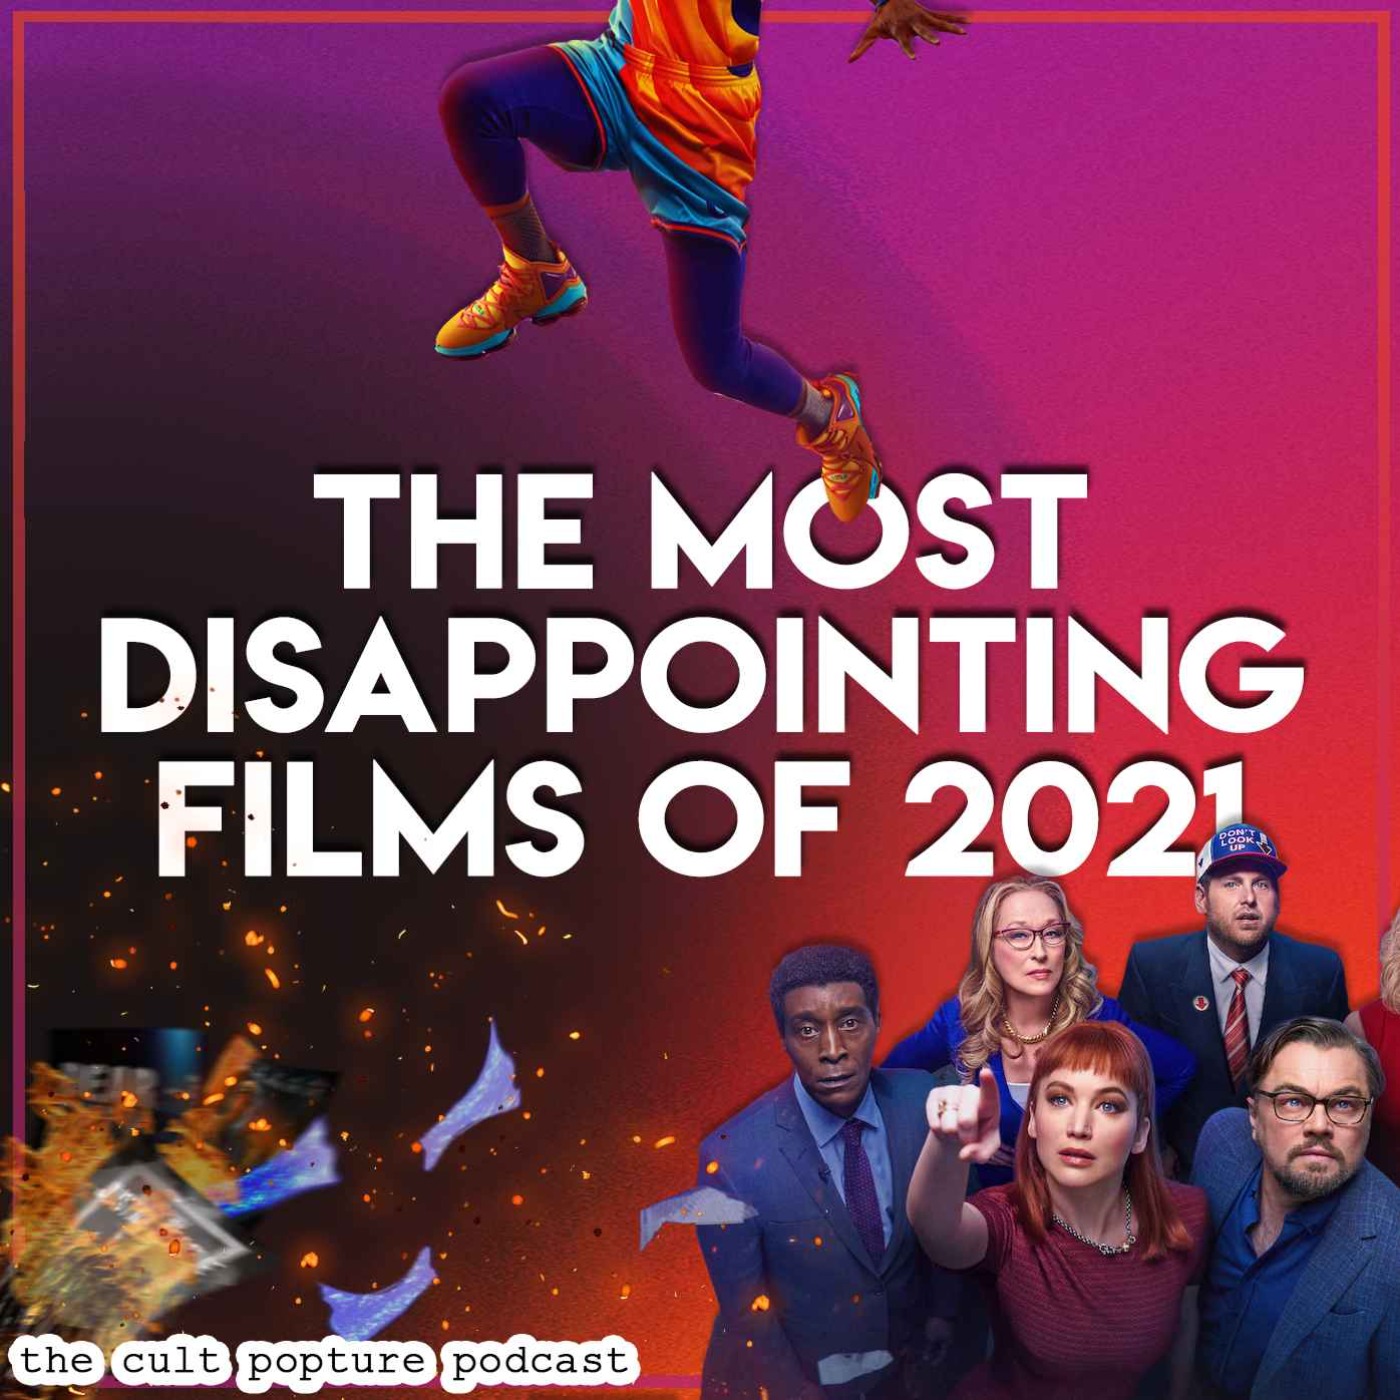 The Most Disappointing Films of 2021 | The Cult Popture Podcast